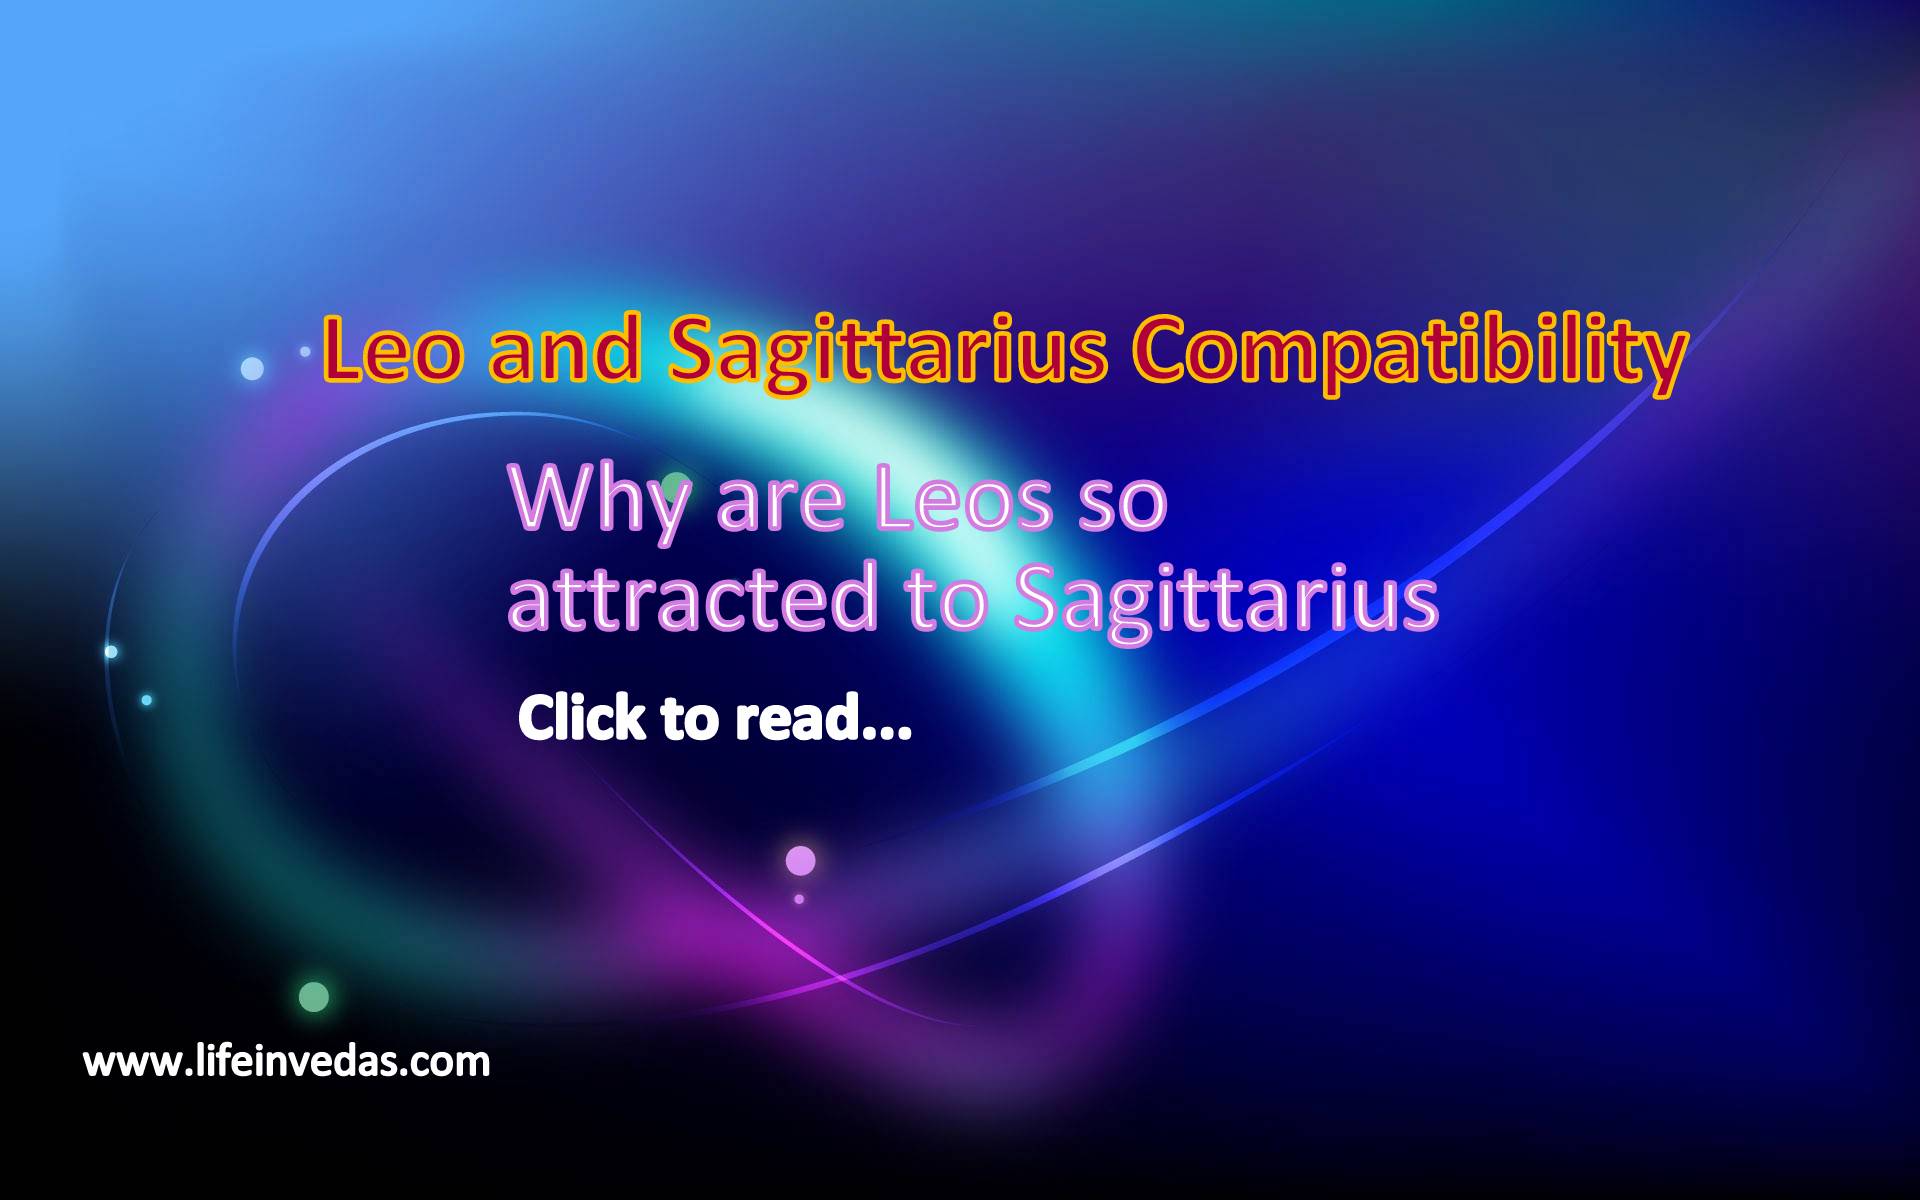 Why are Leos so attracted to Sagittarius